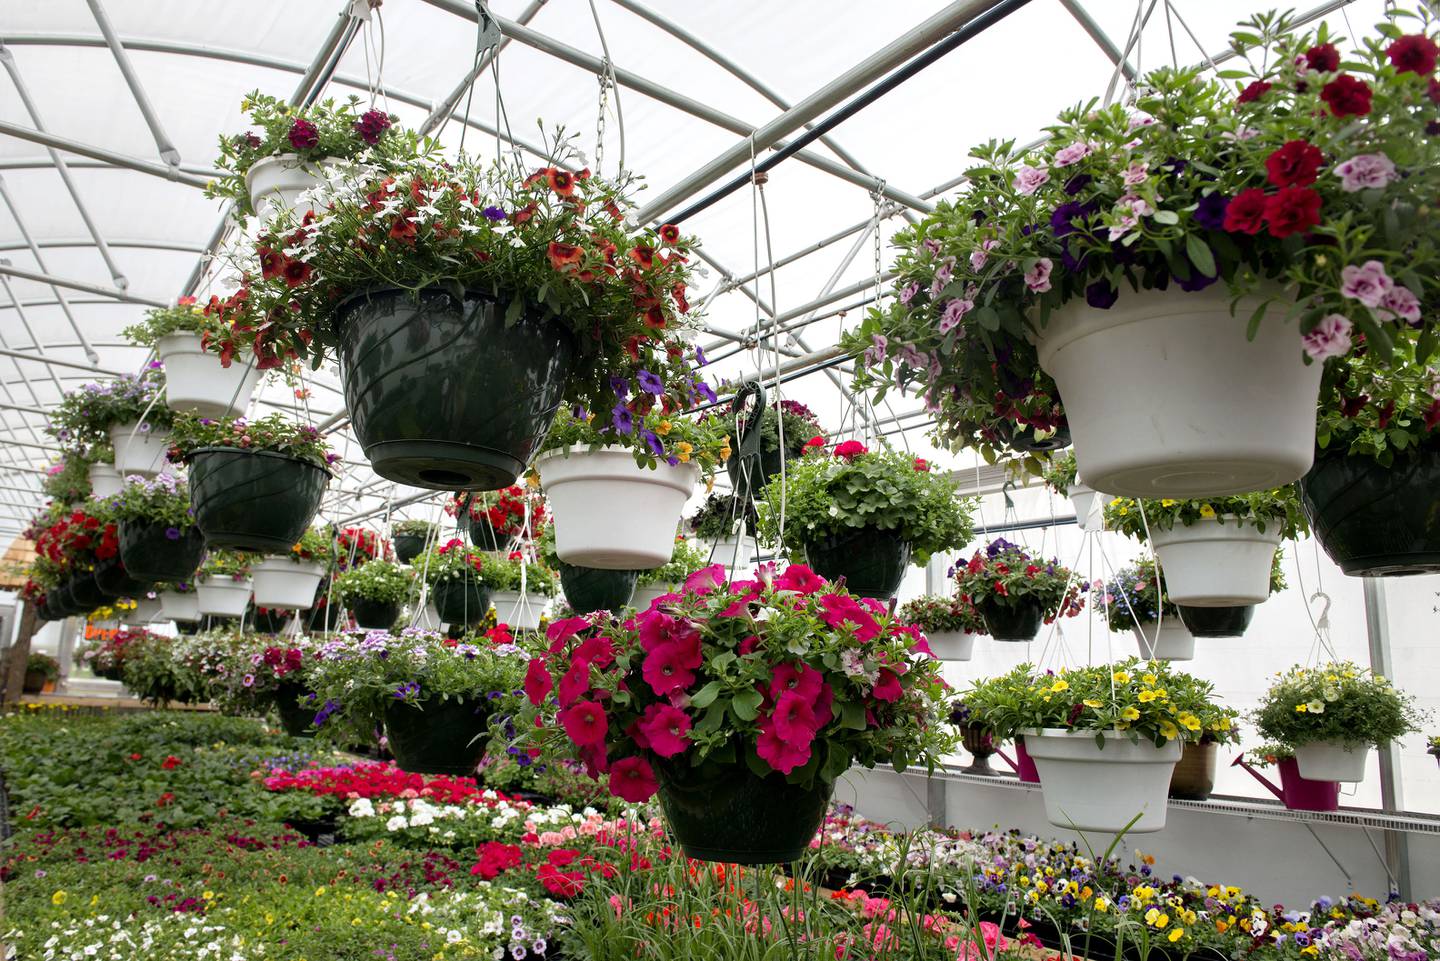 Hanging baskets filled with colorful flowers make a great gift for yourself or a loved one.